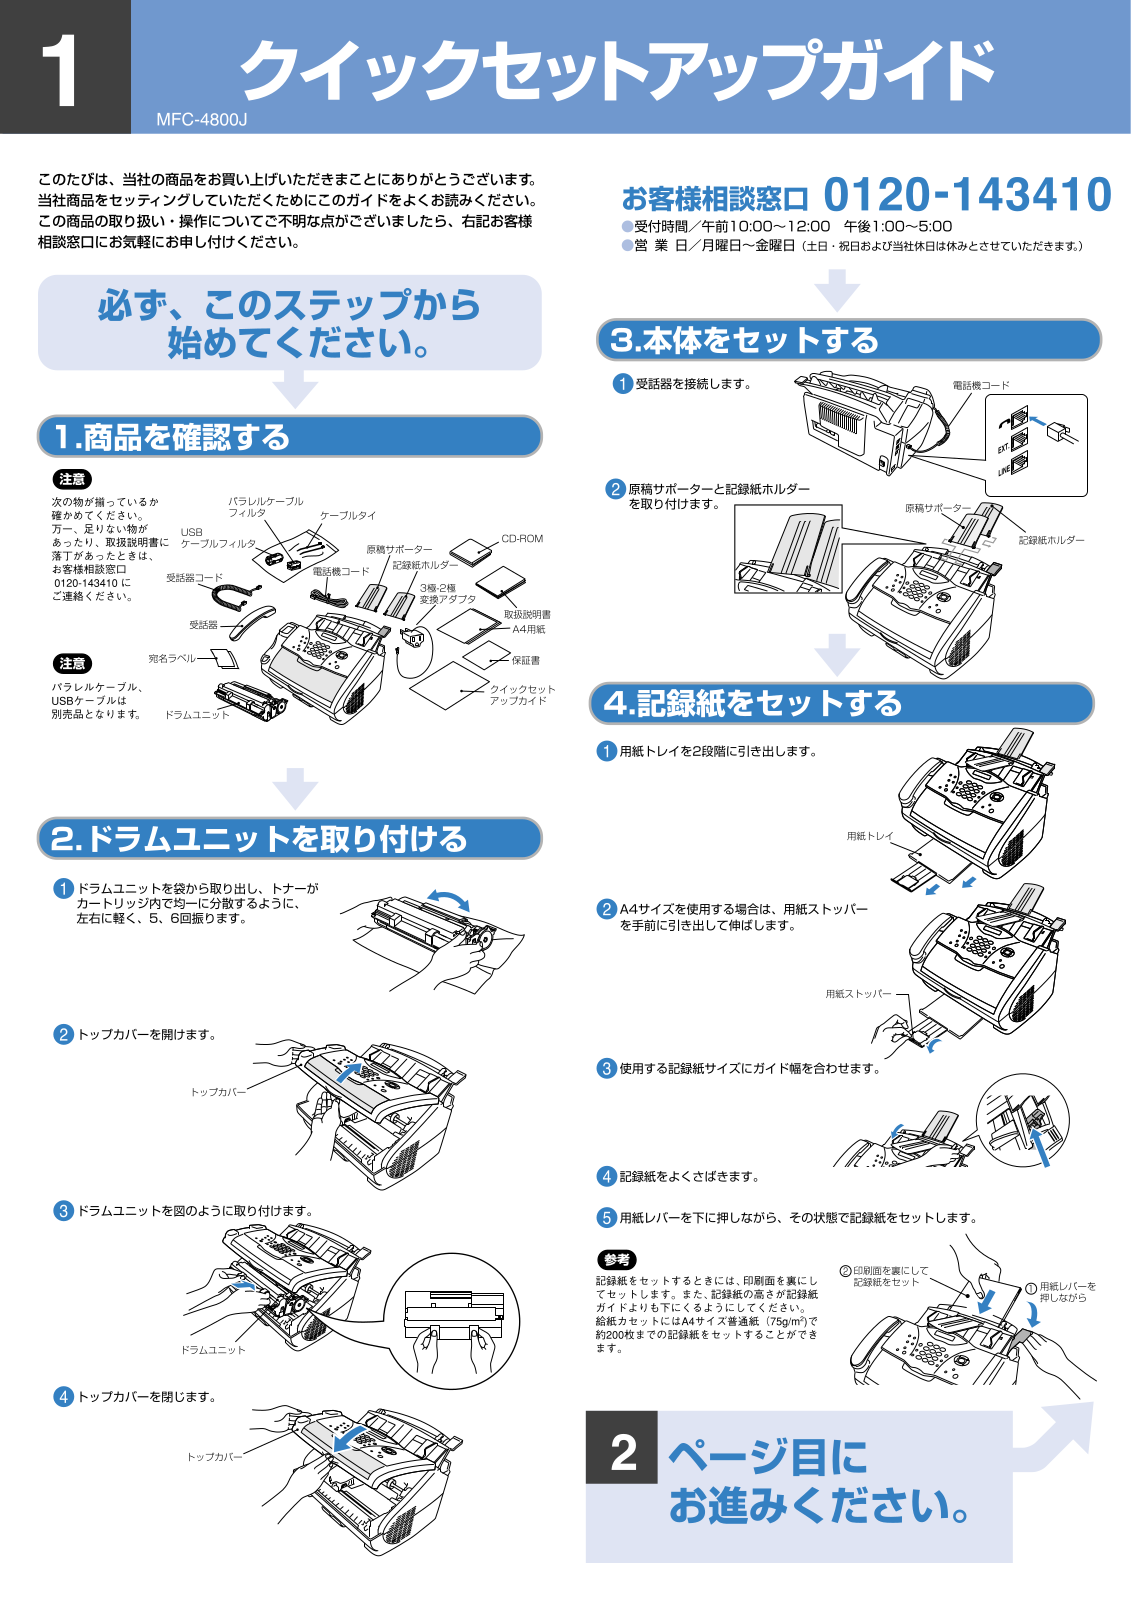 Brother MFC-4800J Easy installation guide